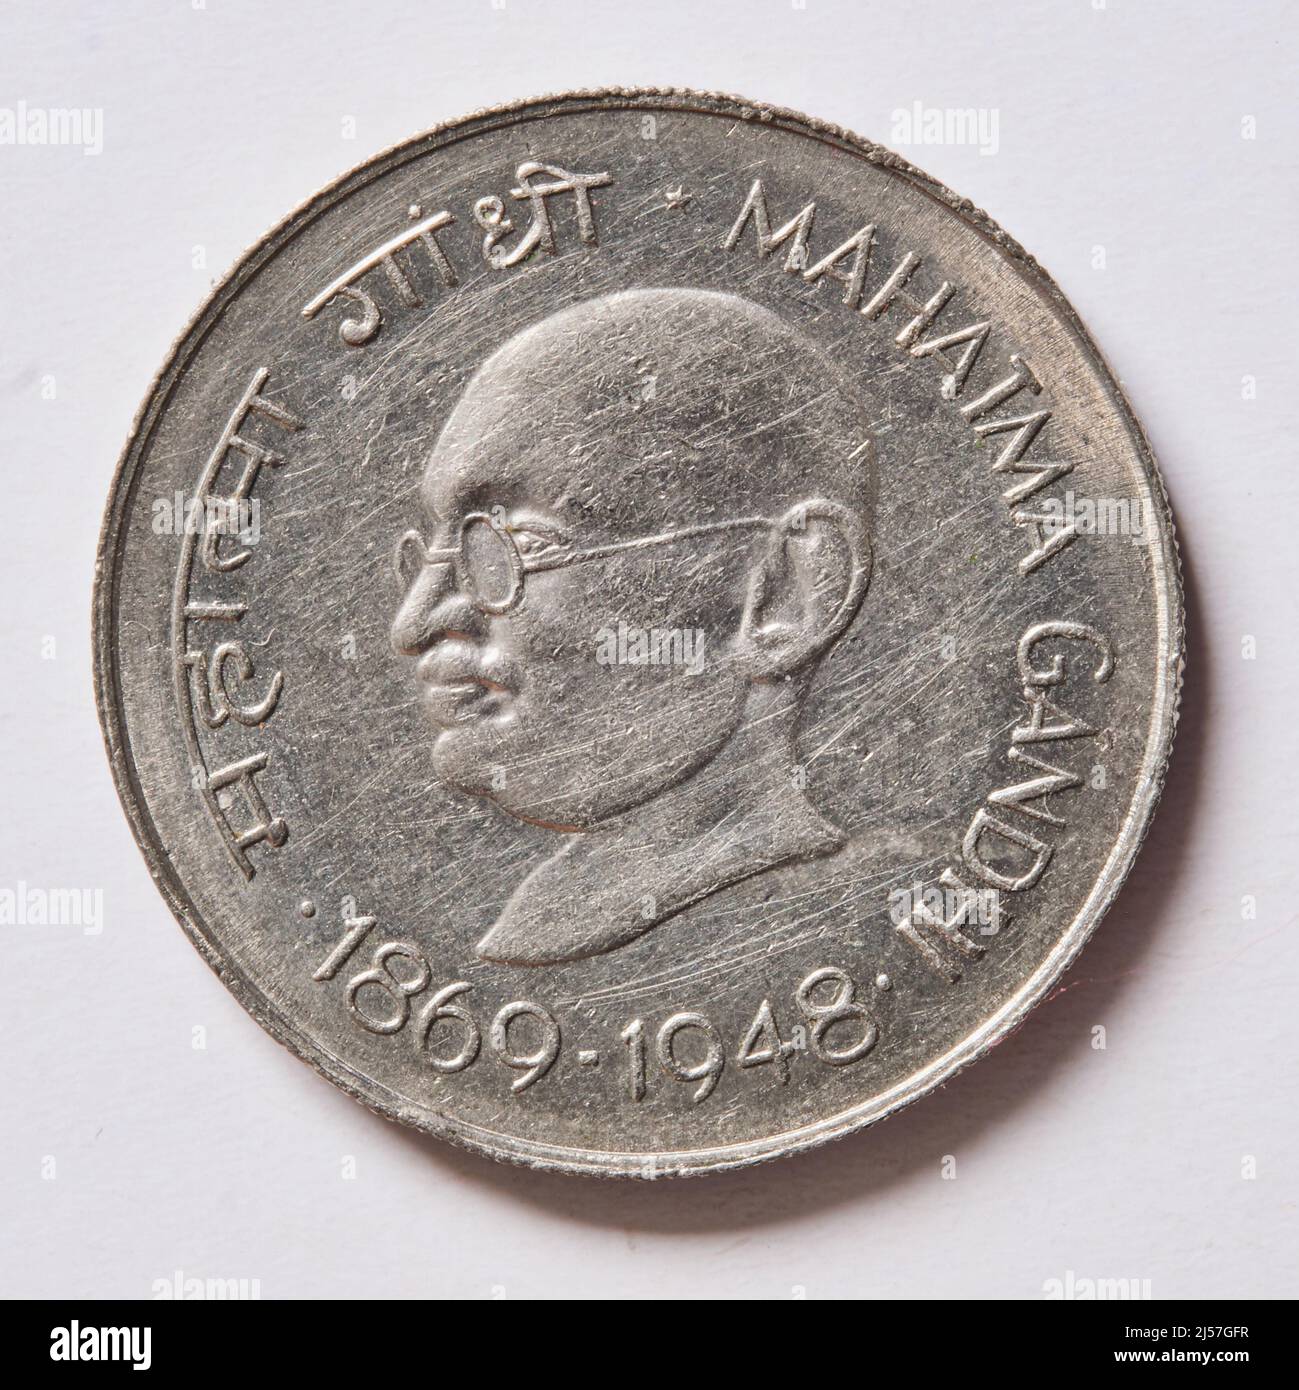 India: A 10 rupee coin commemorating the birth centenary of Mohandas Karamchand Gandhi (1869-1948) aka Mahatma Gandhi, 1969. Gandhi was the pre-eminent political and ideological leader of India during the Indian independence movement. He pioneered satyagraha. This is defined as resistance to tyranny through mass civil disobedience, a philosophy firmly founded upon ahimsa, or total non-violence. This concept helped India gain independence and inspired movements for civil rights and freedom across the world. Gandhi is often referred to as Mahatma Gandhi or 'Great Soul'. Stock Photo